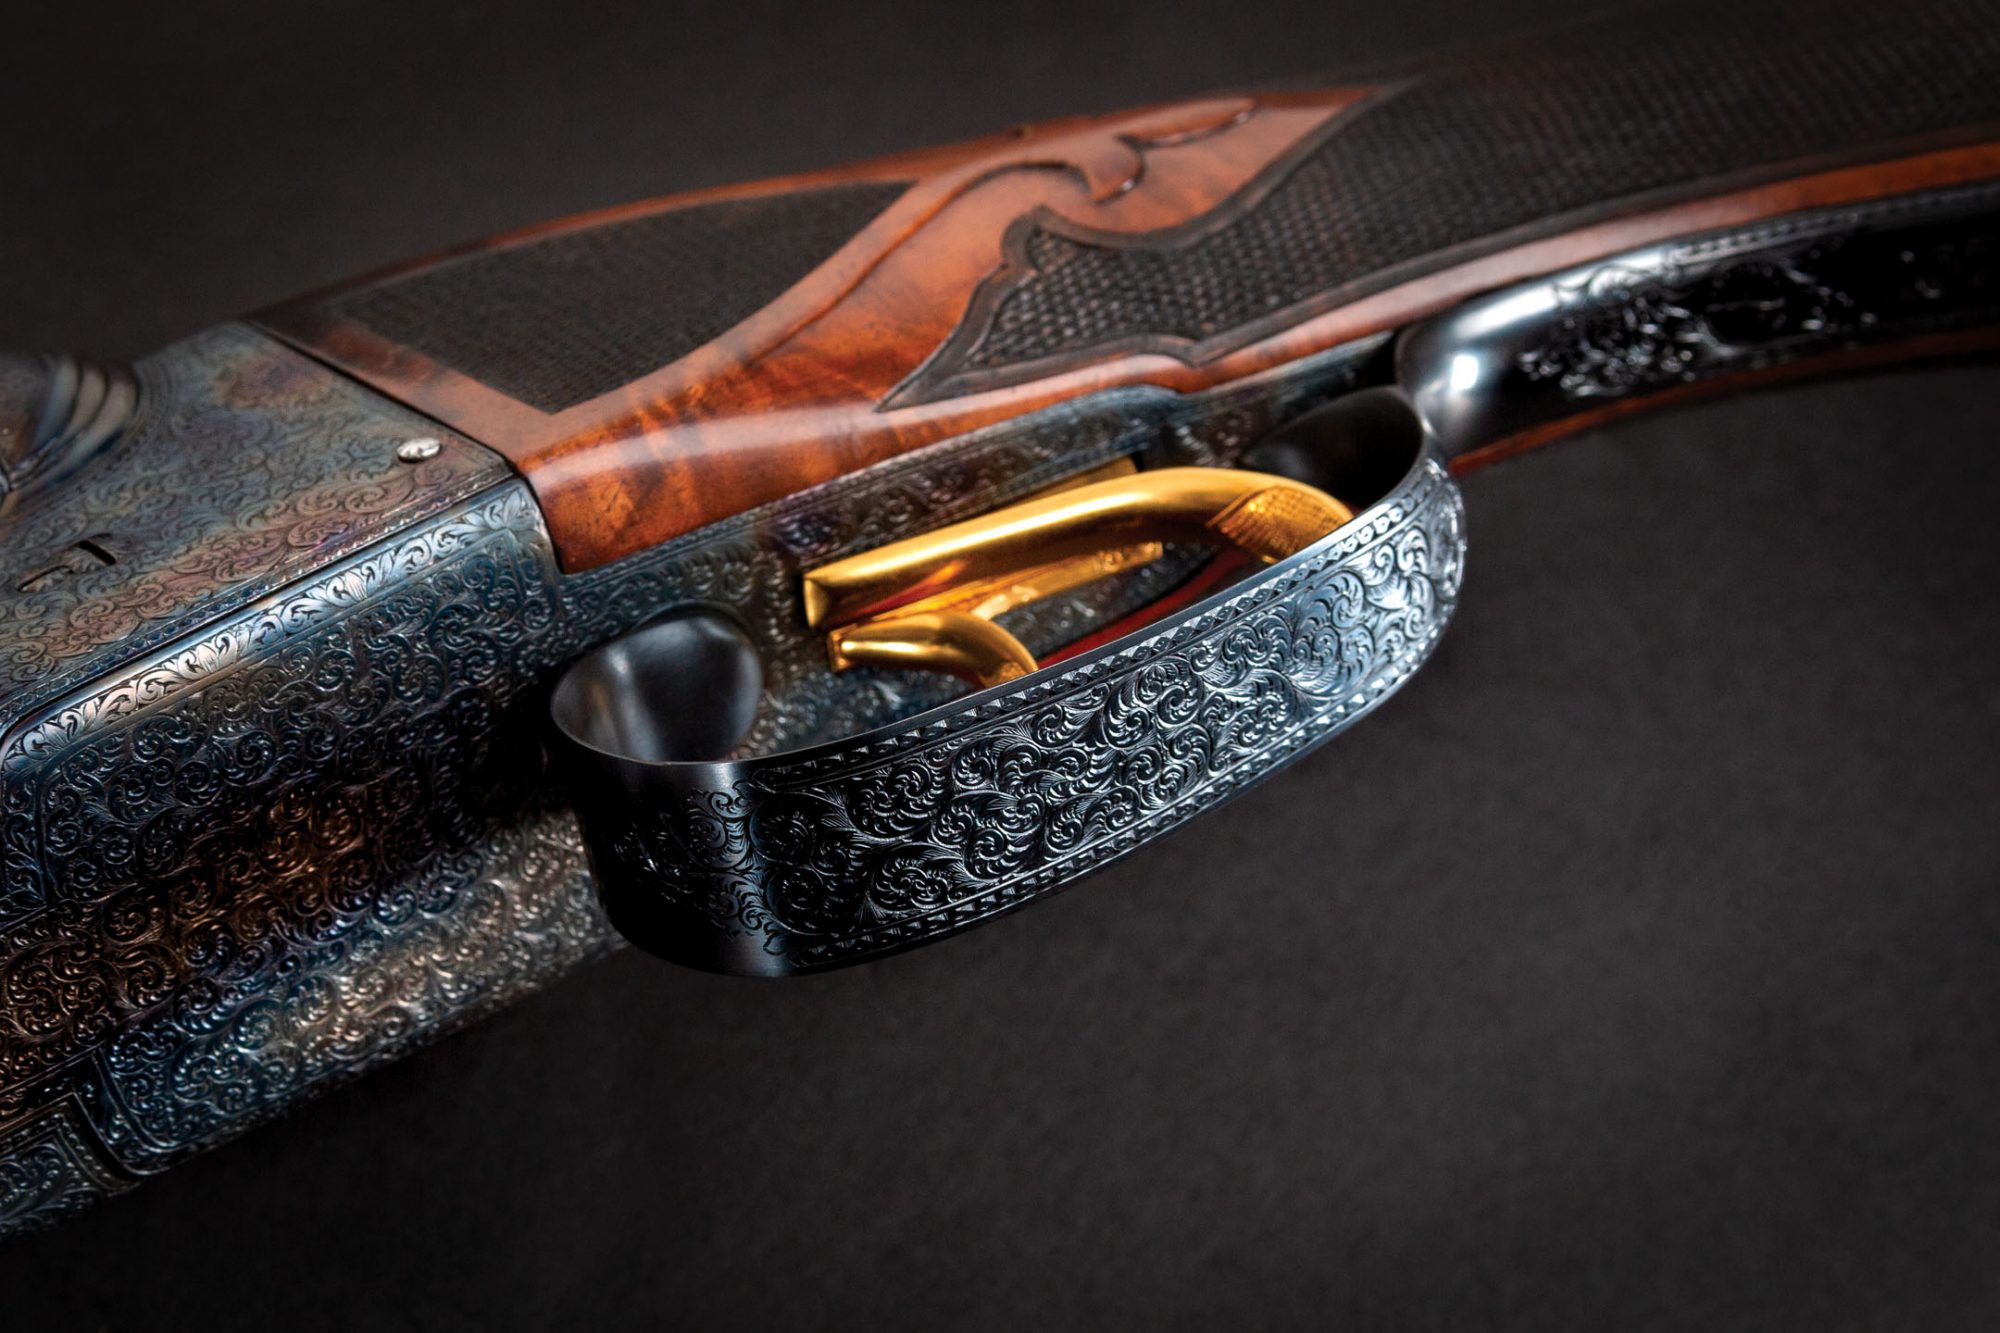 A Parker A1 side by side shotgun from 1925, fully restored by Turnbull Restoration Co. of Bloomfield, New York